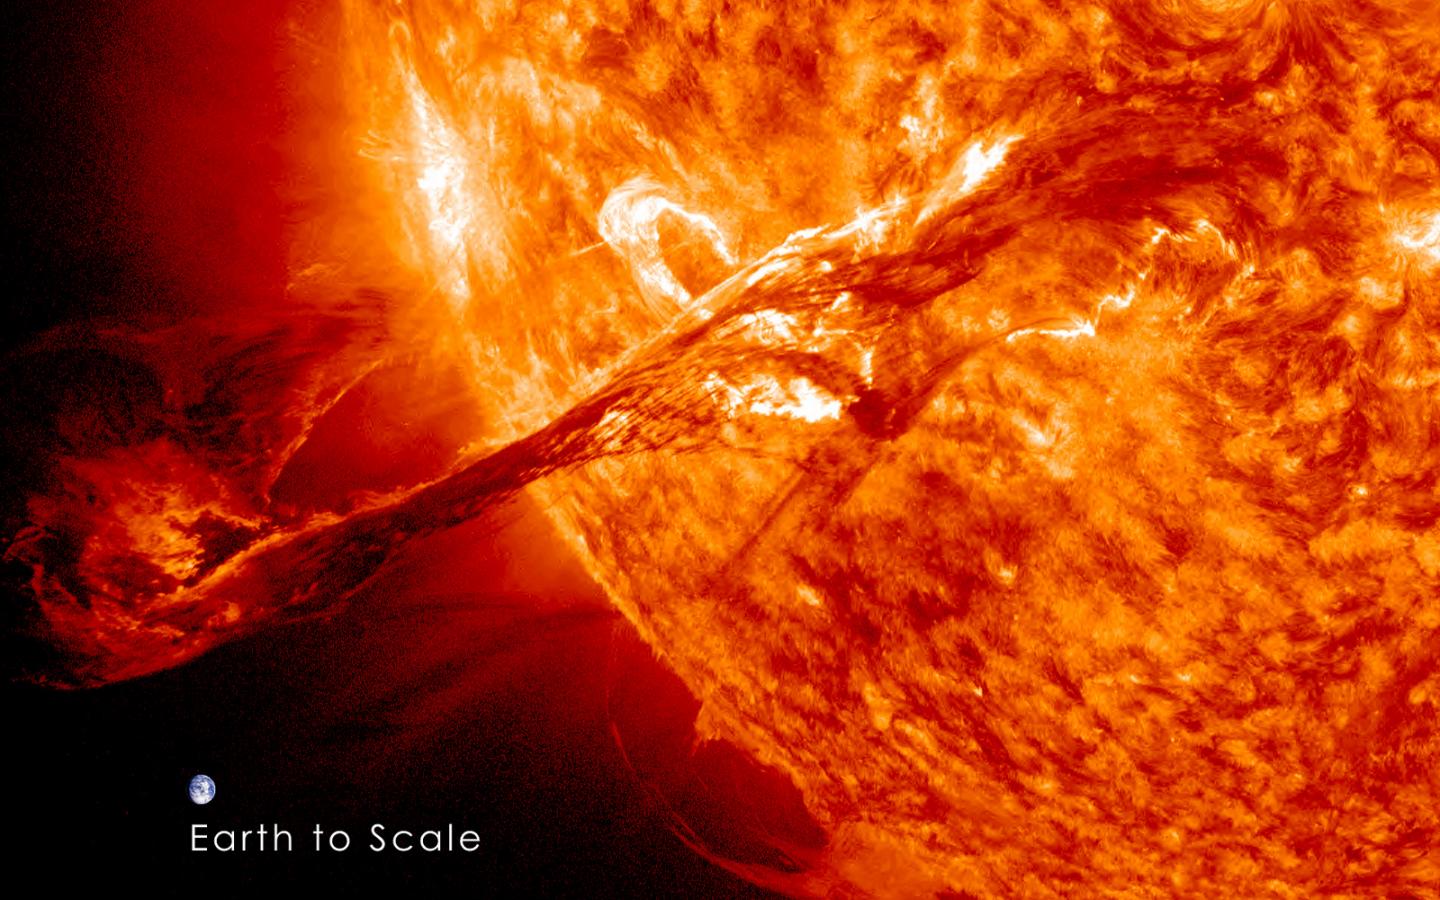 Coronal mass ejections from the sun heat Earth's upper atmosphere, then cool it dramatically, according to a new University of Colorado Boulder study